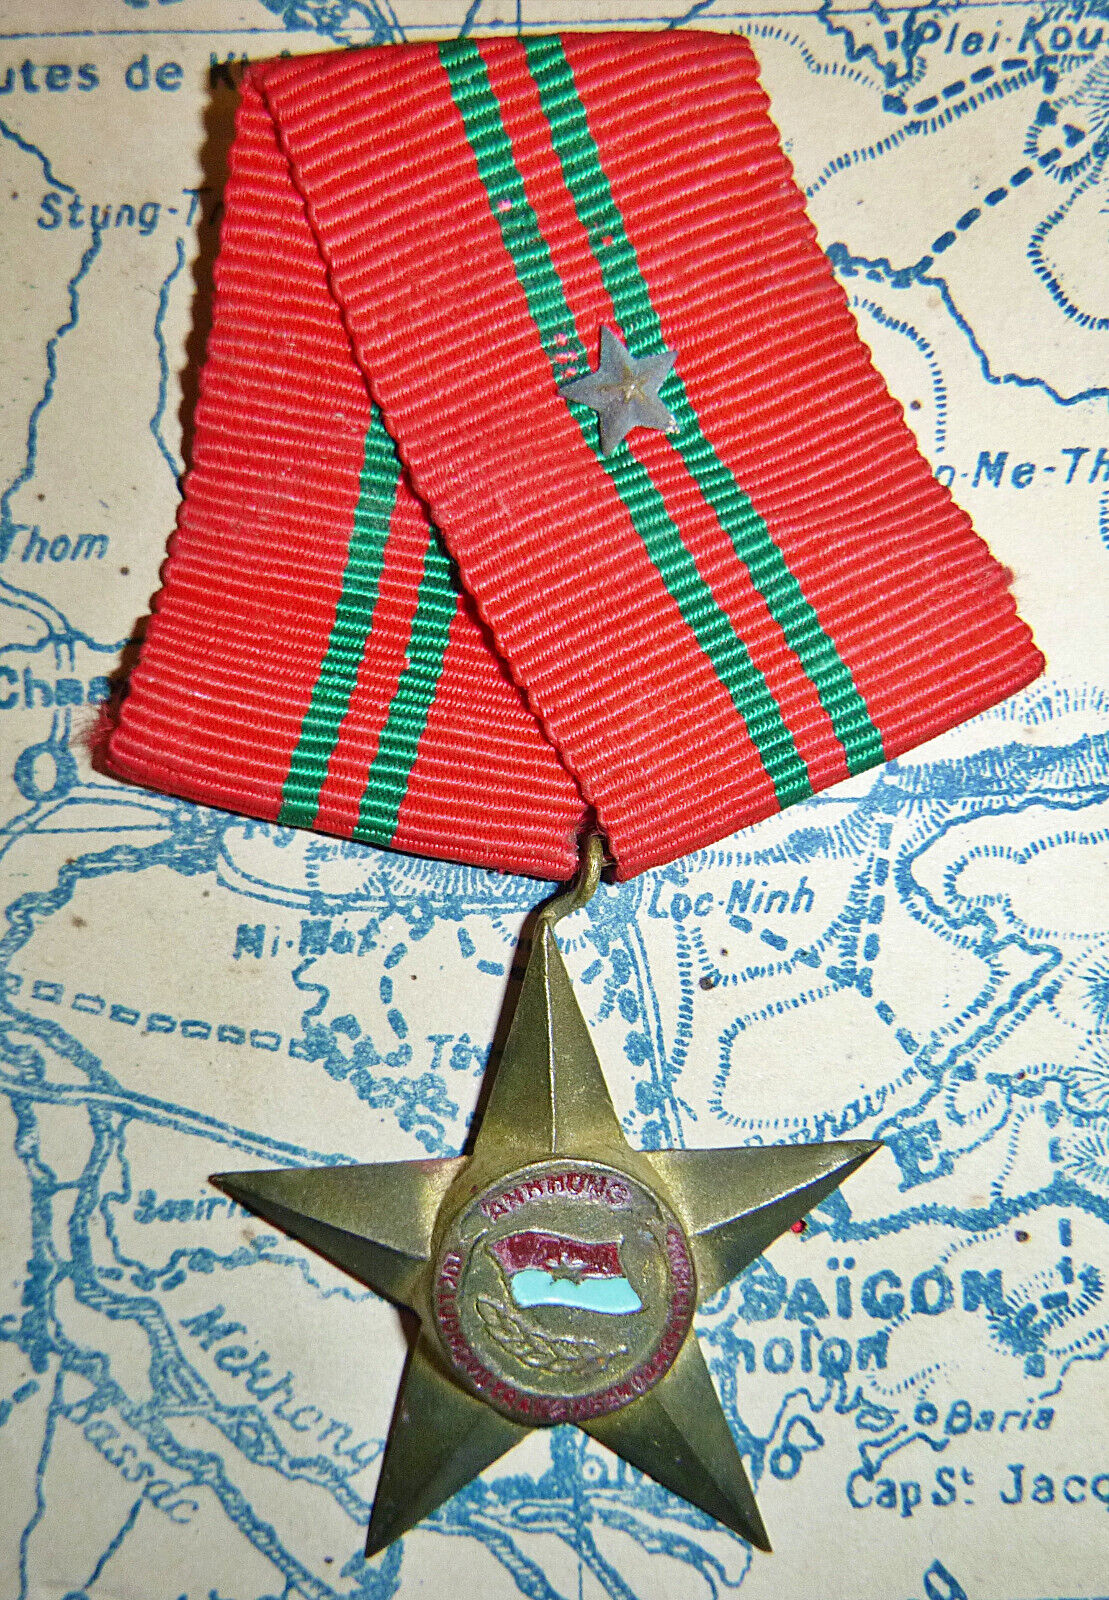 VC MEDAL - Liberation Armed Forces Hero - NLF - VIET CONG - Vietnam War - M.492